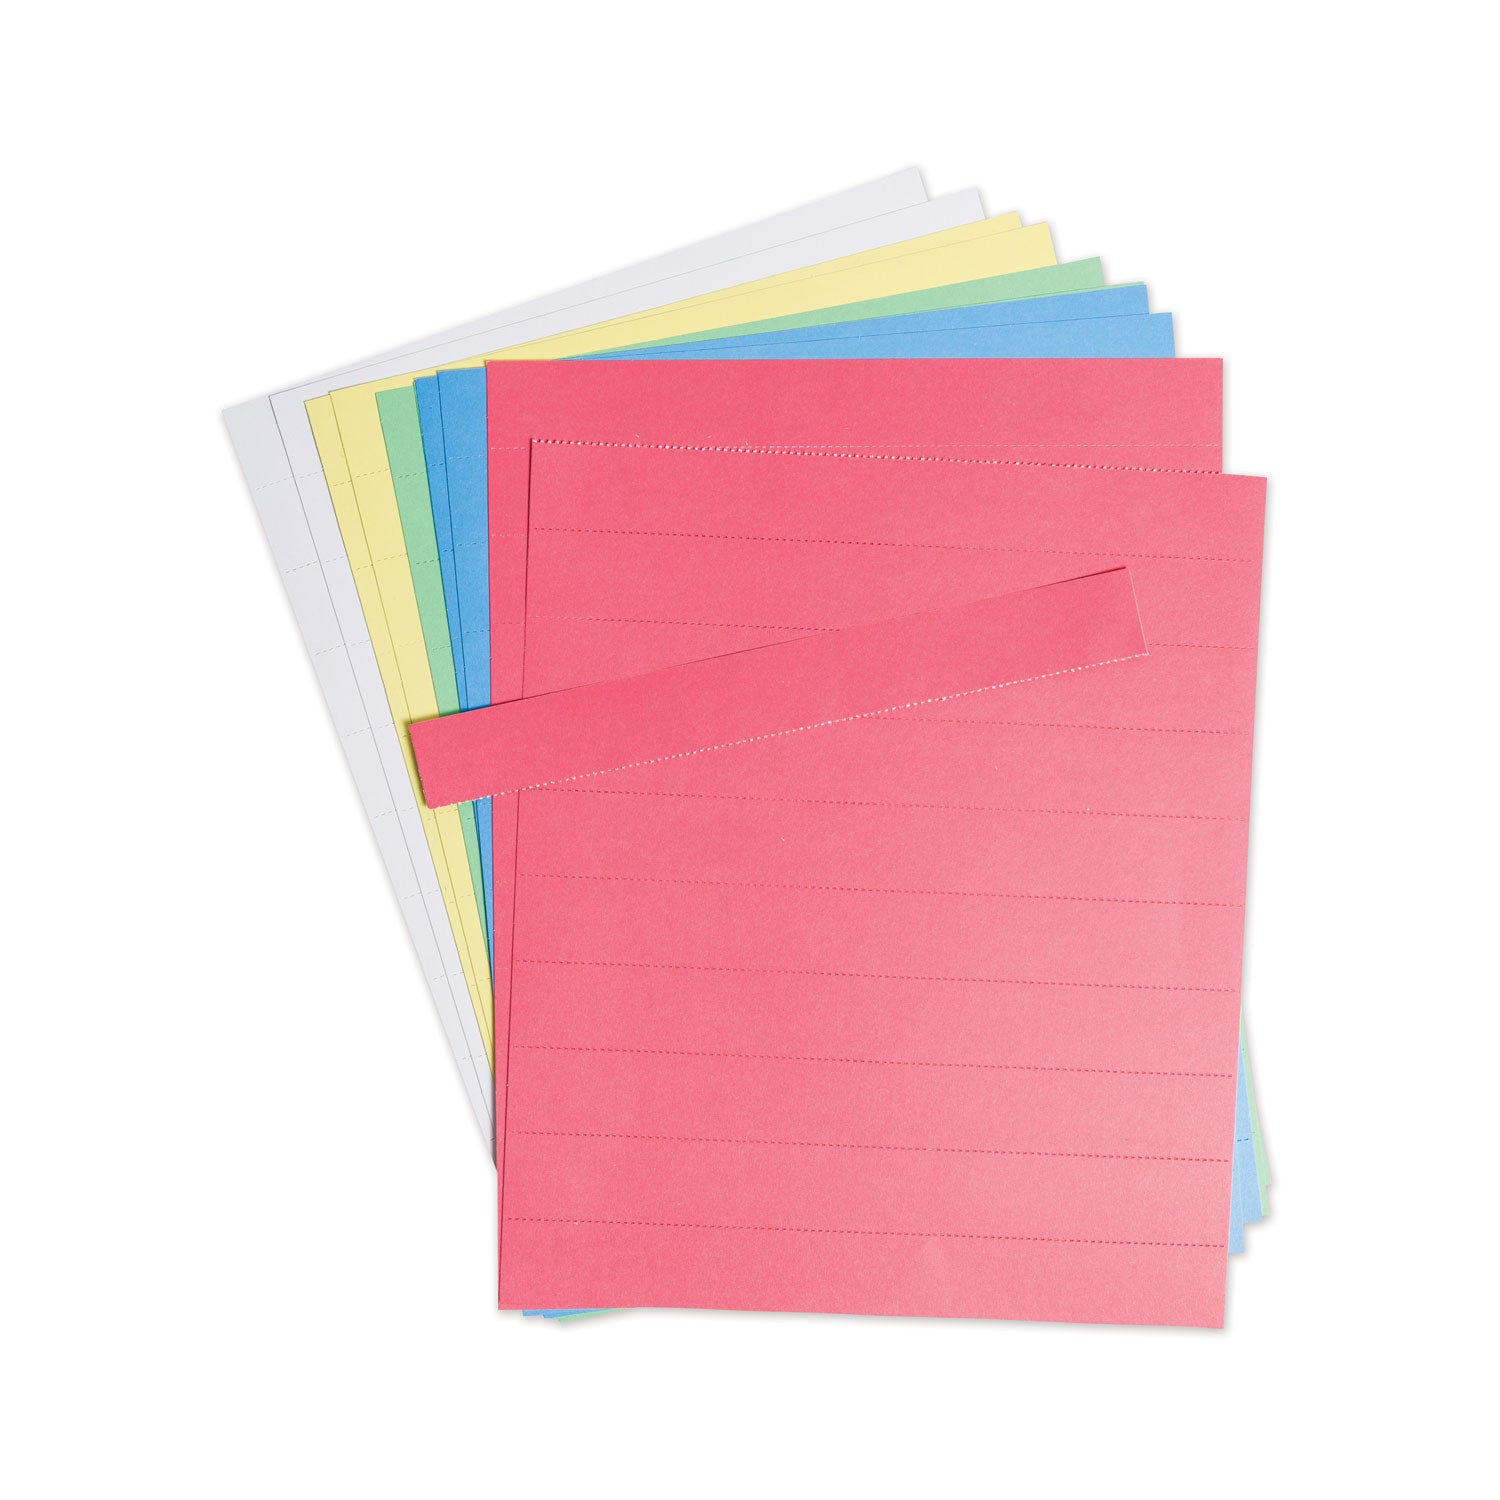 data-card-replacement-sheet-85-x-11-sheets-perforated-at-1-assorted-10-pack_ubrfm1614 - 2